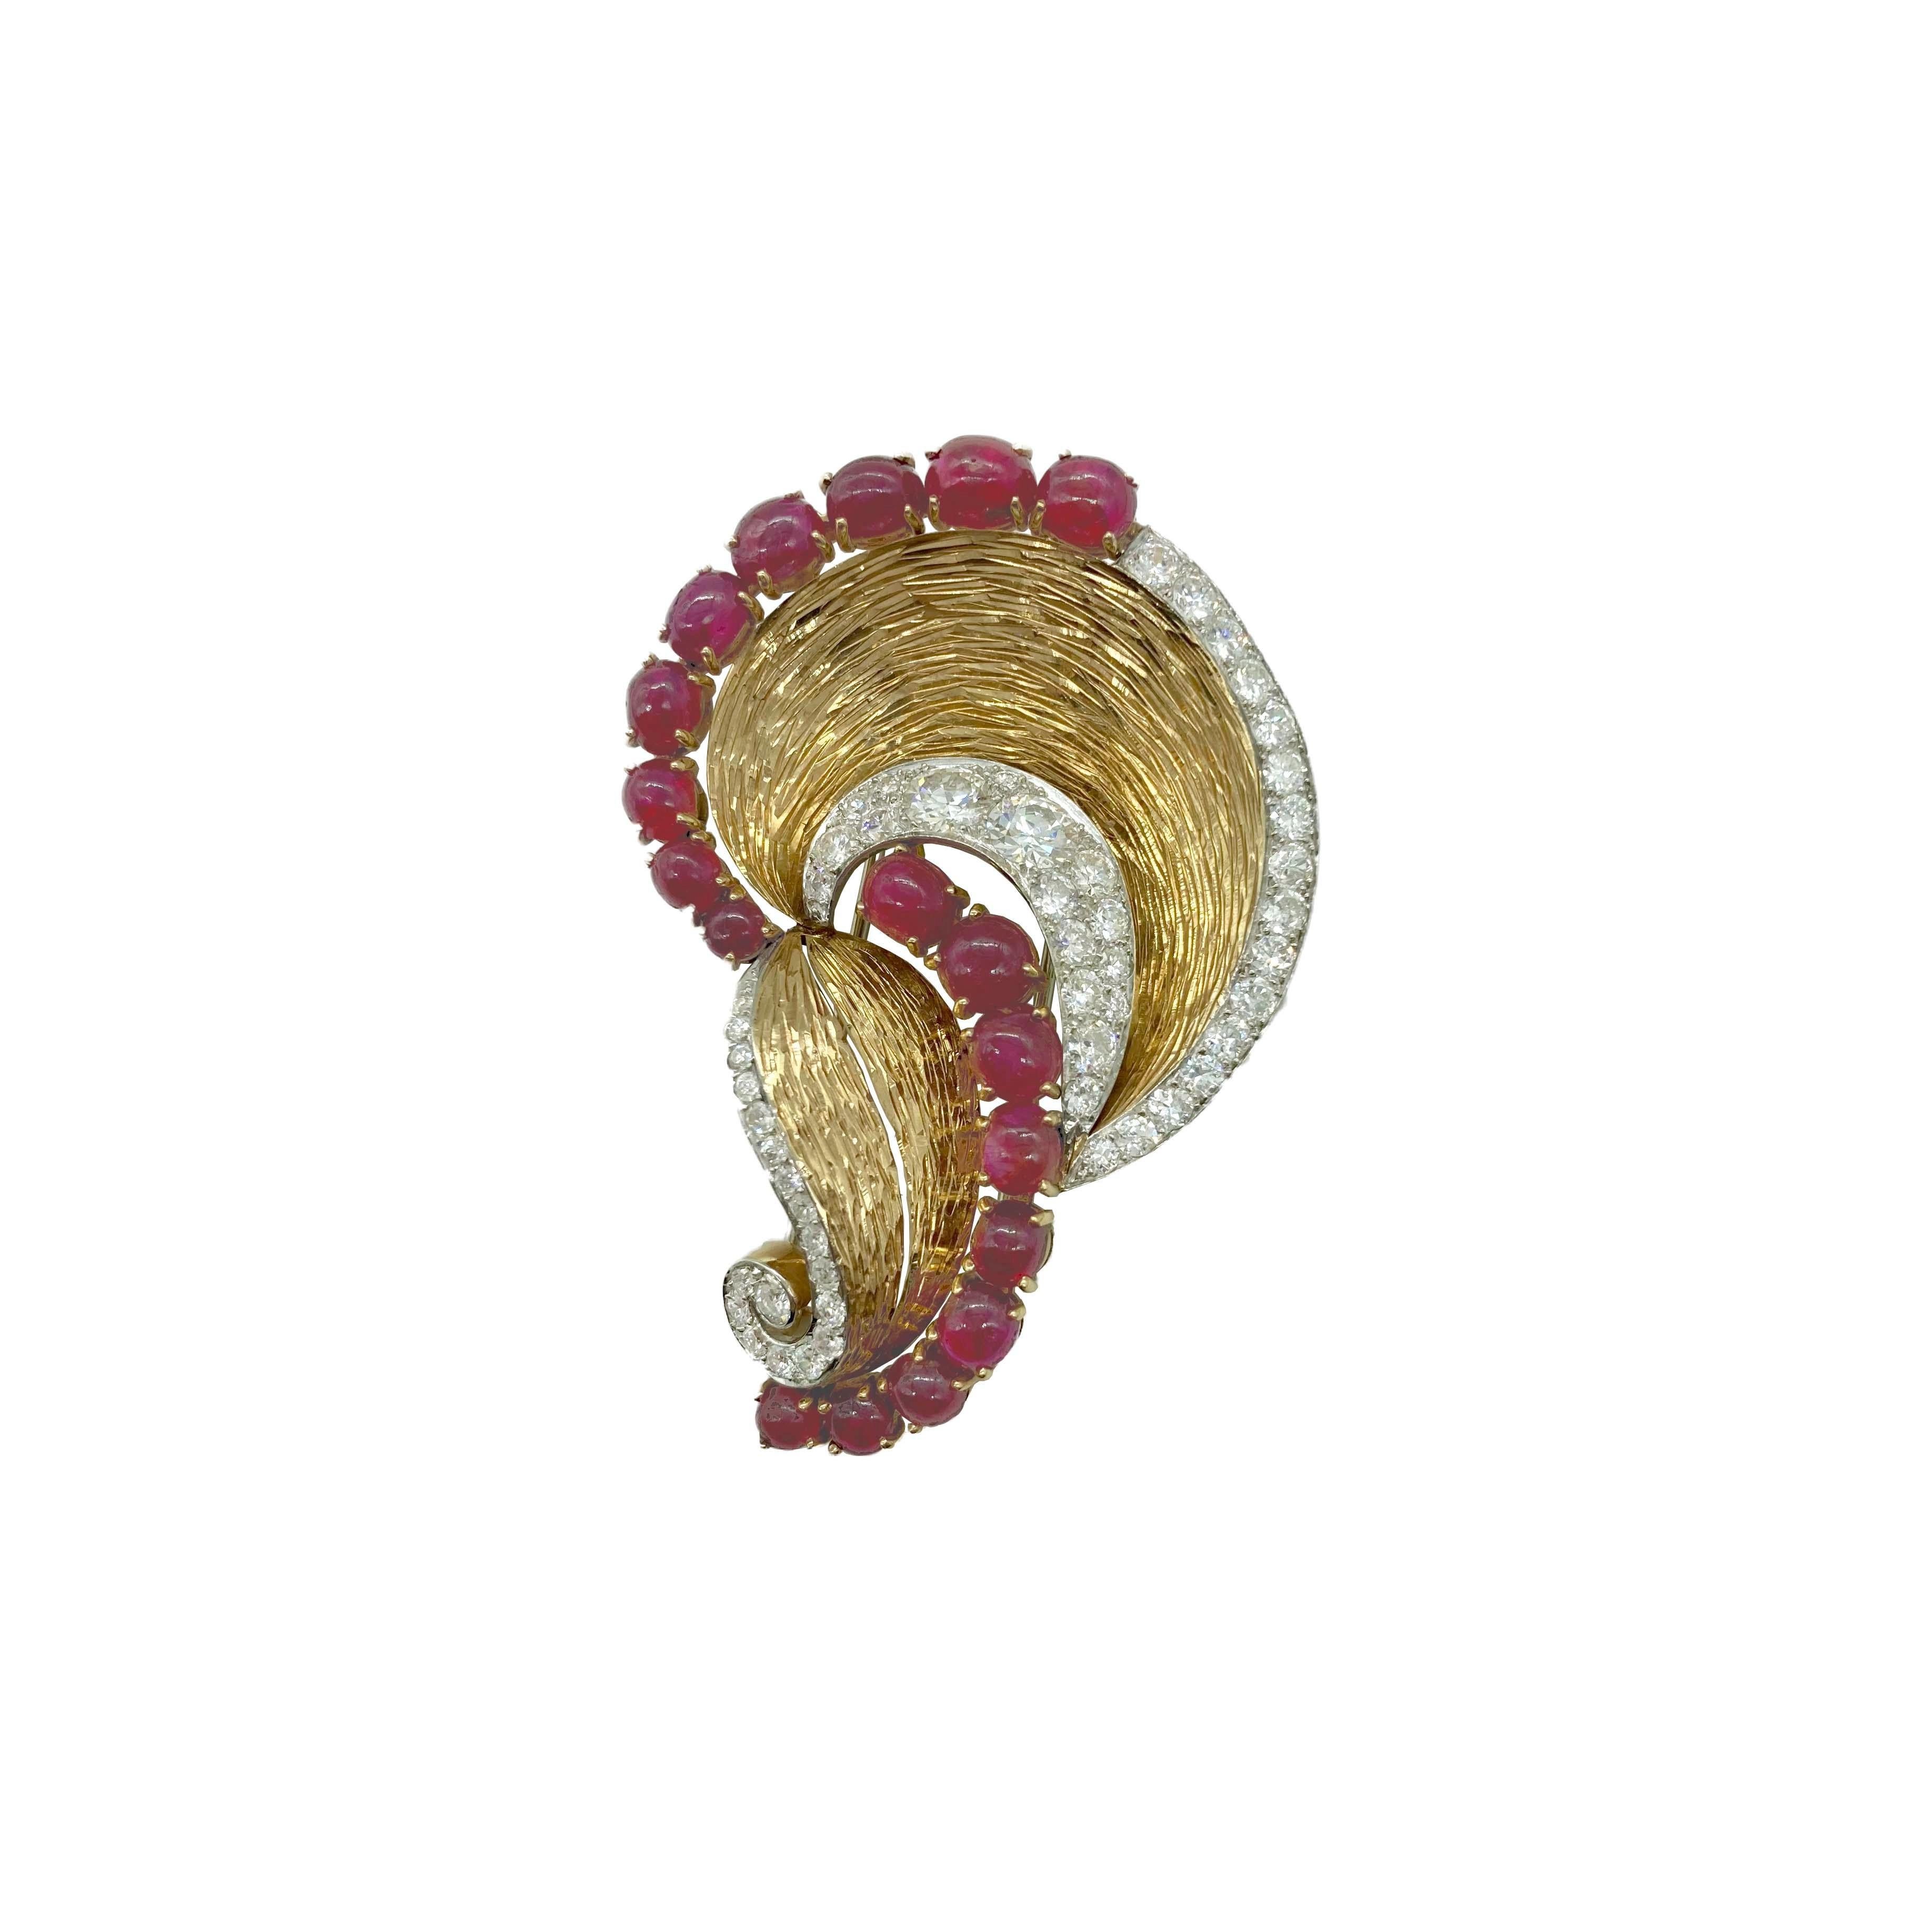 A chic Trabert & Hoeffer for Mauboussin retro clip brooch in 18 karat gold and platinum with 4 carats of diamonds and 18 cabochon rubies totaling 12 carats. Weighs 25.20 grams 